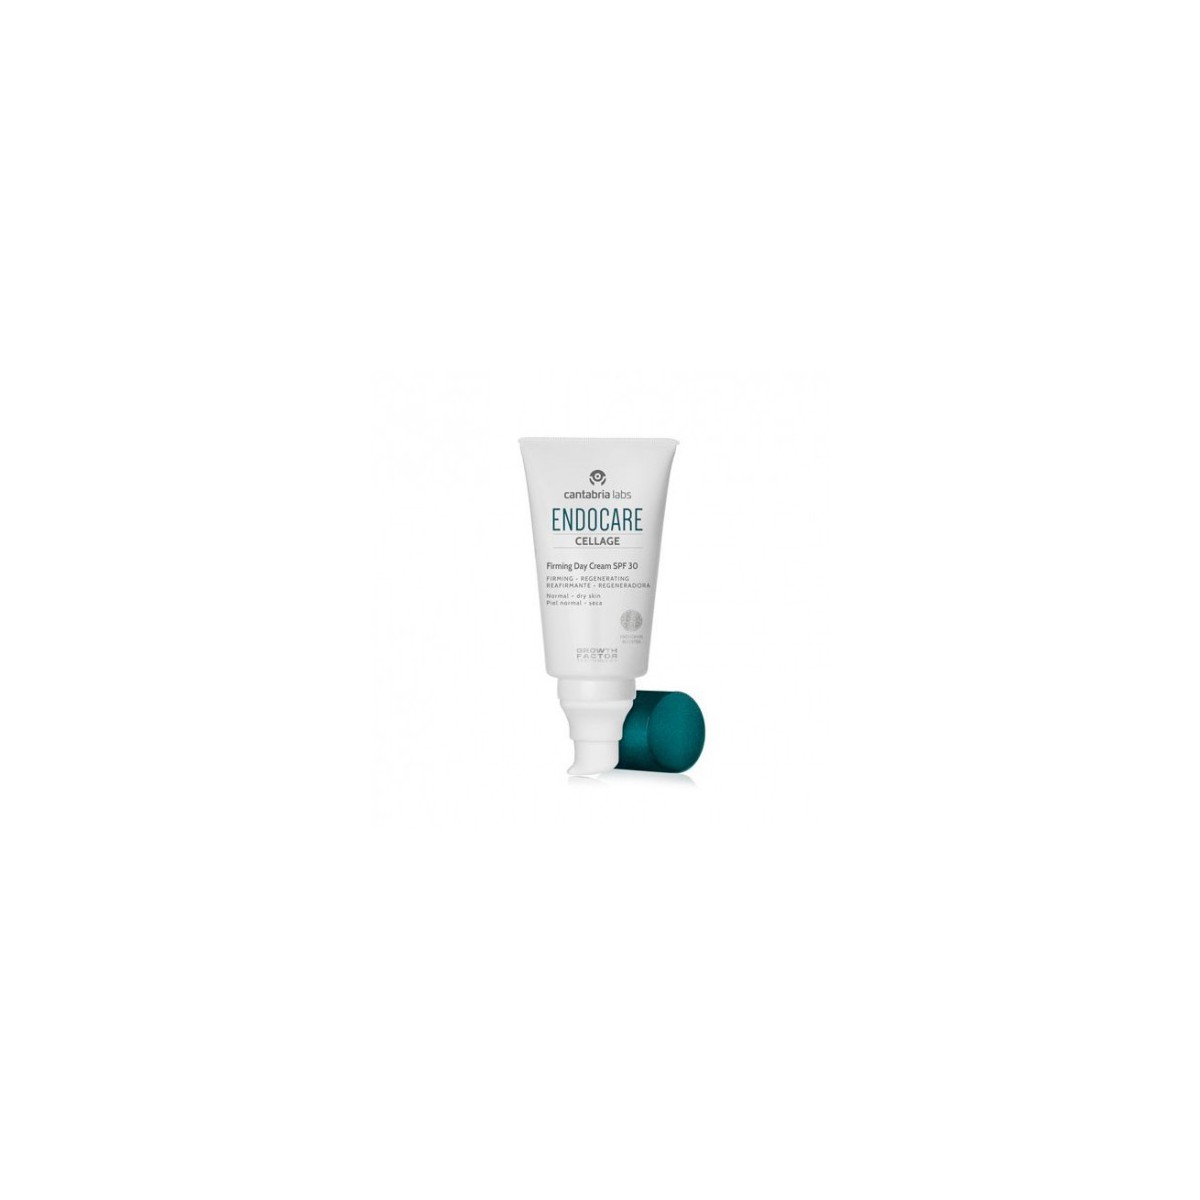 Endocare Cellage Firming Day Cream SPF30